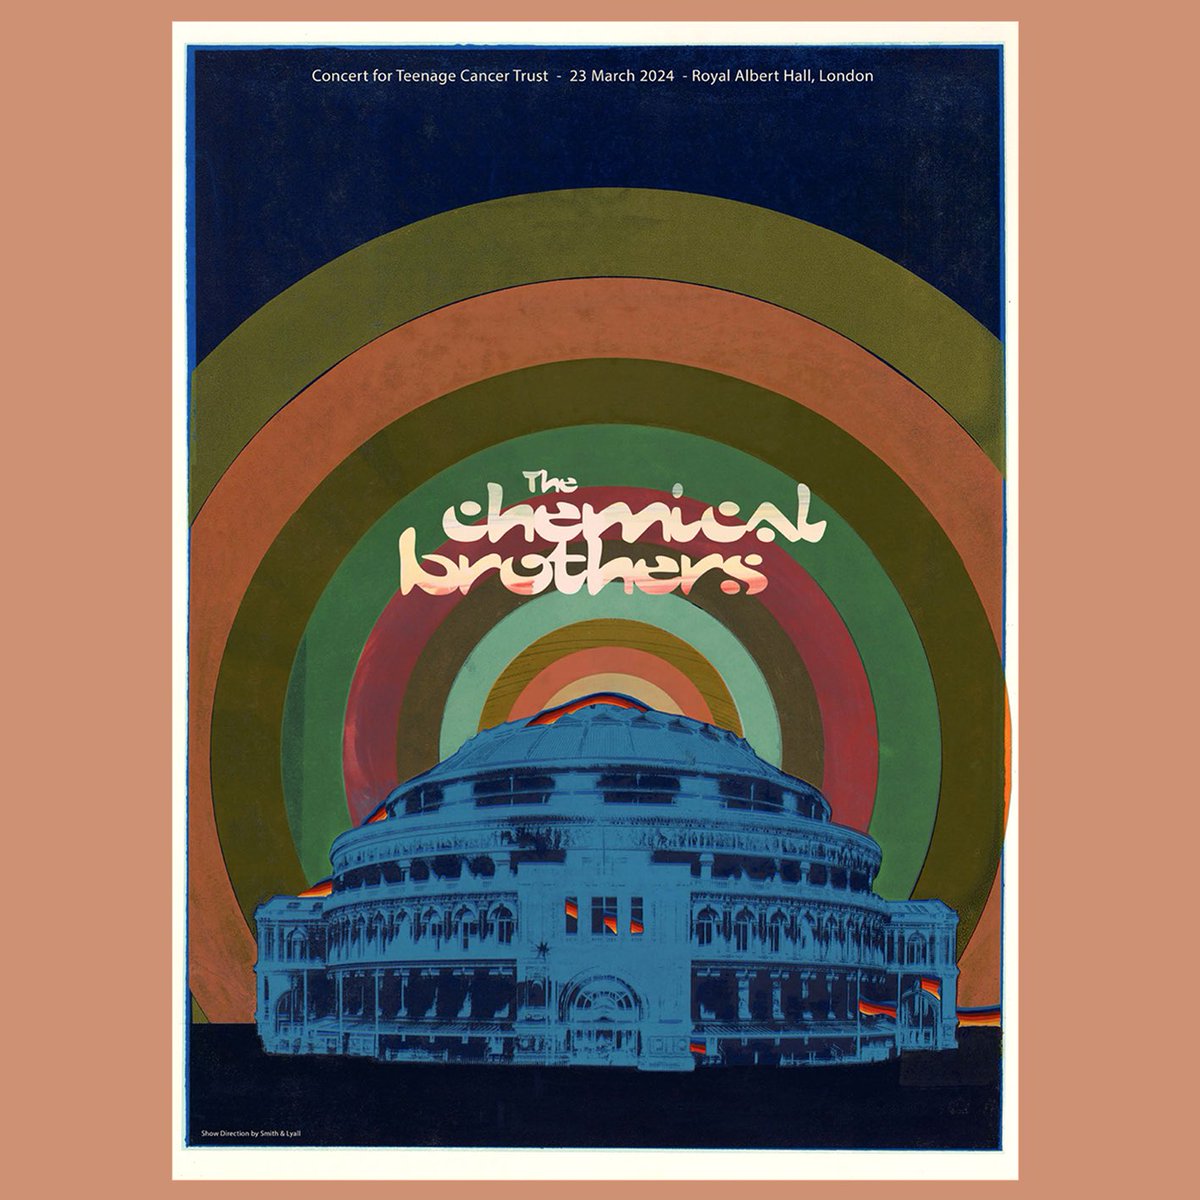 Limited Edition Poster / released this Sat @RoyalAlbertHall for @ChemBros gig in aid of @TeenageCancer / Edition of just 200 / Numbered edition 🌈🙌🥳